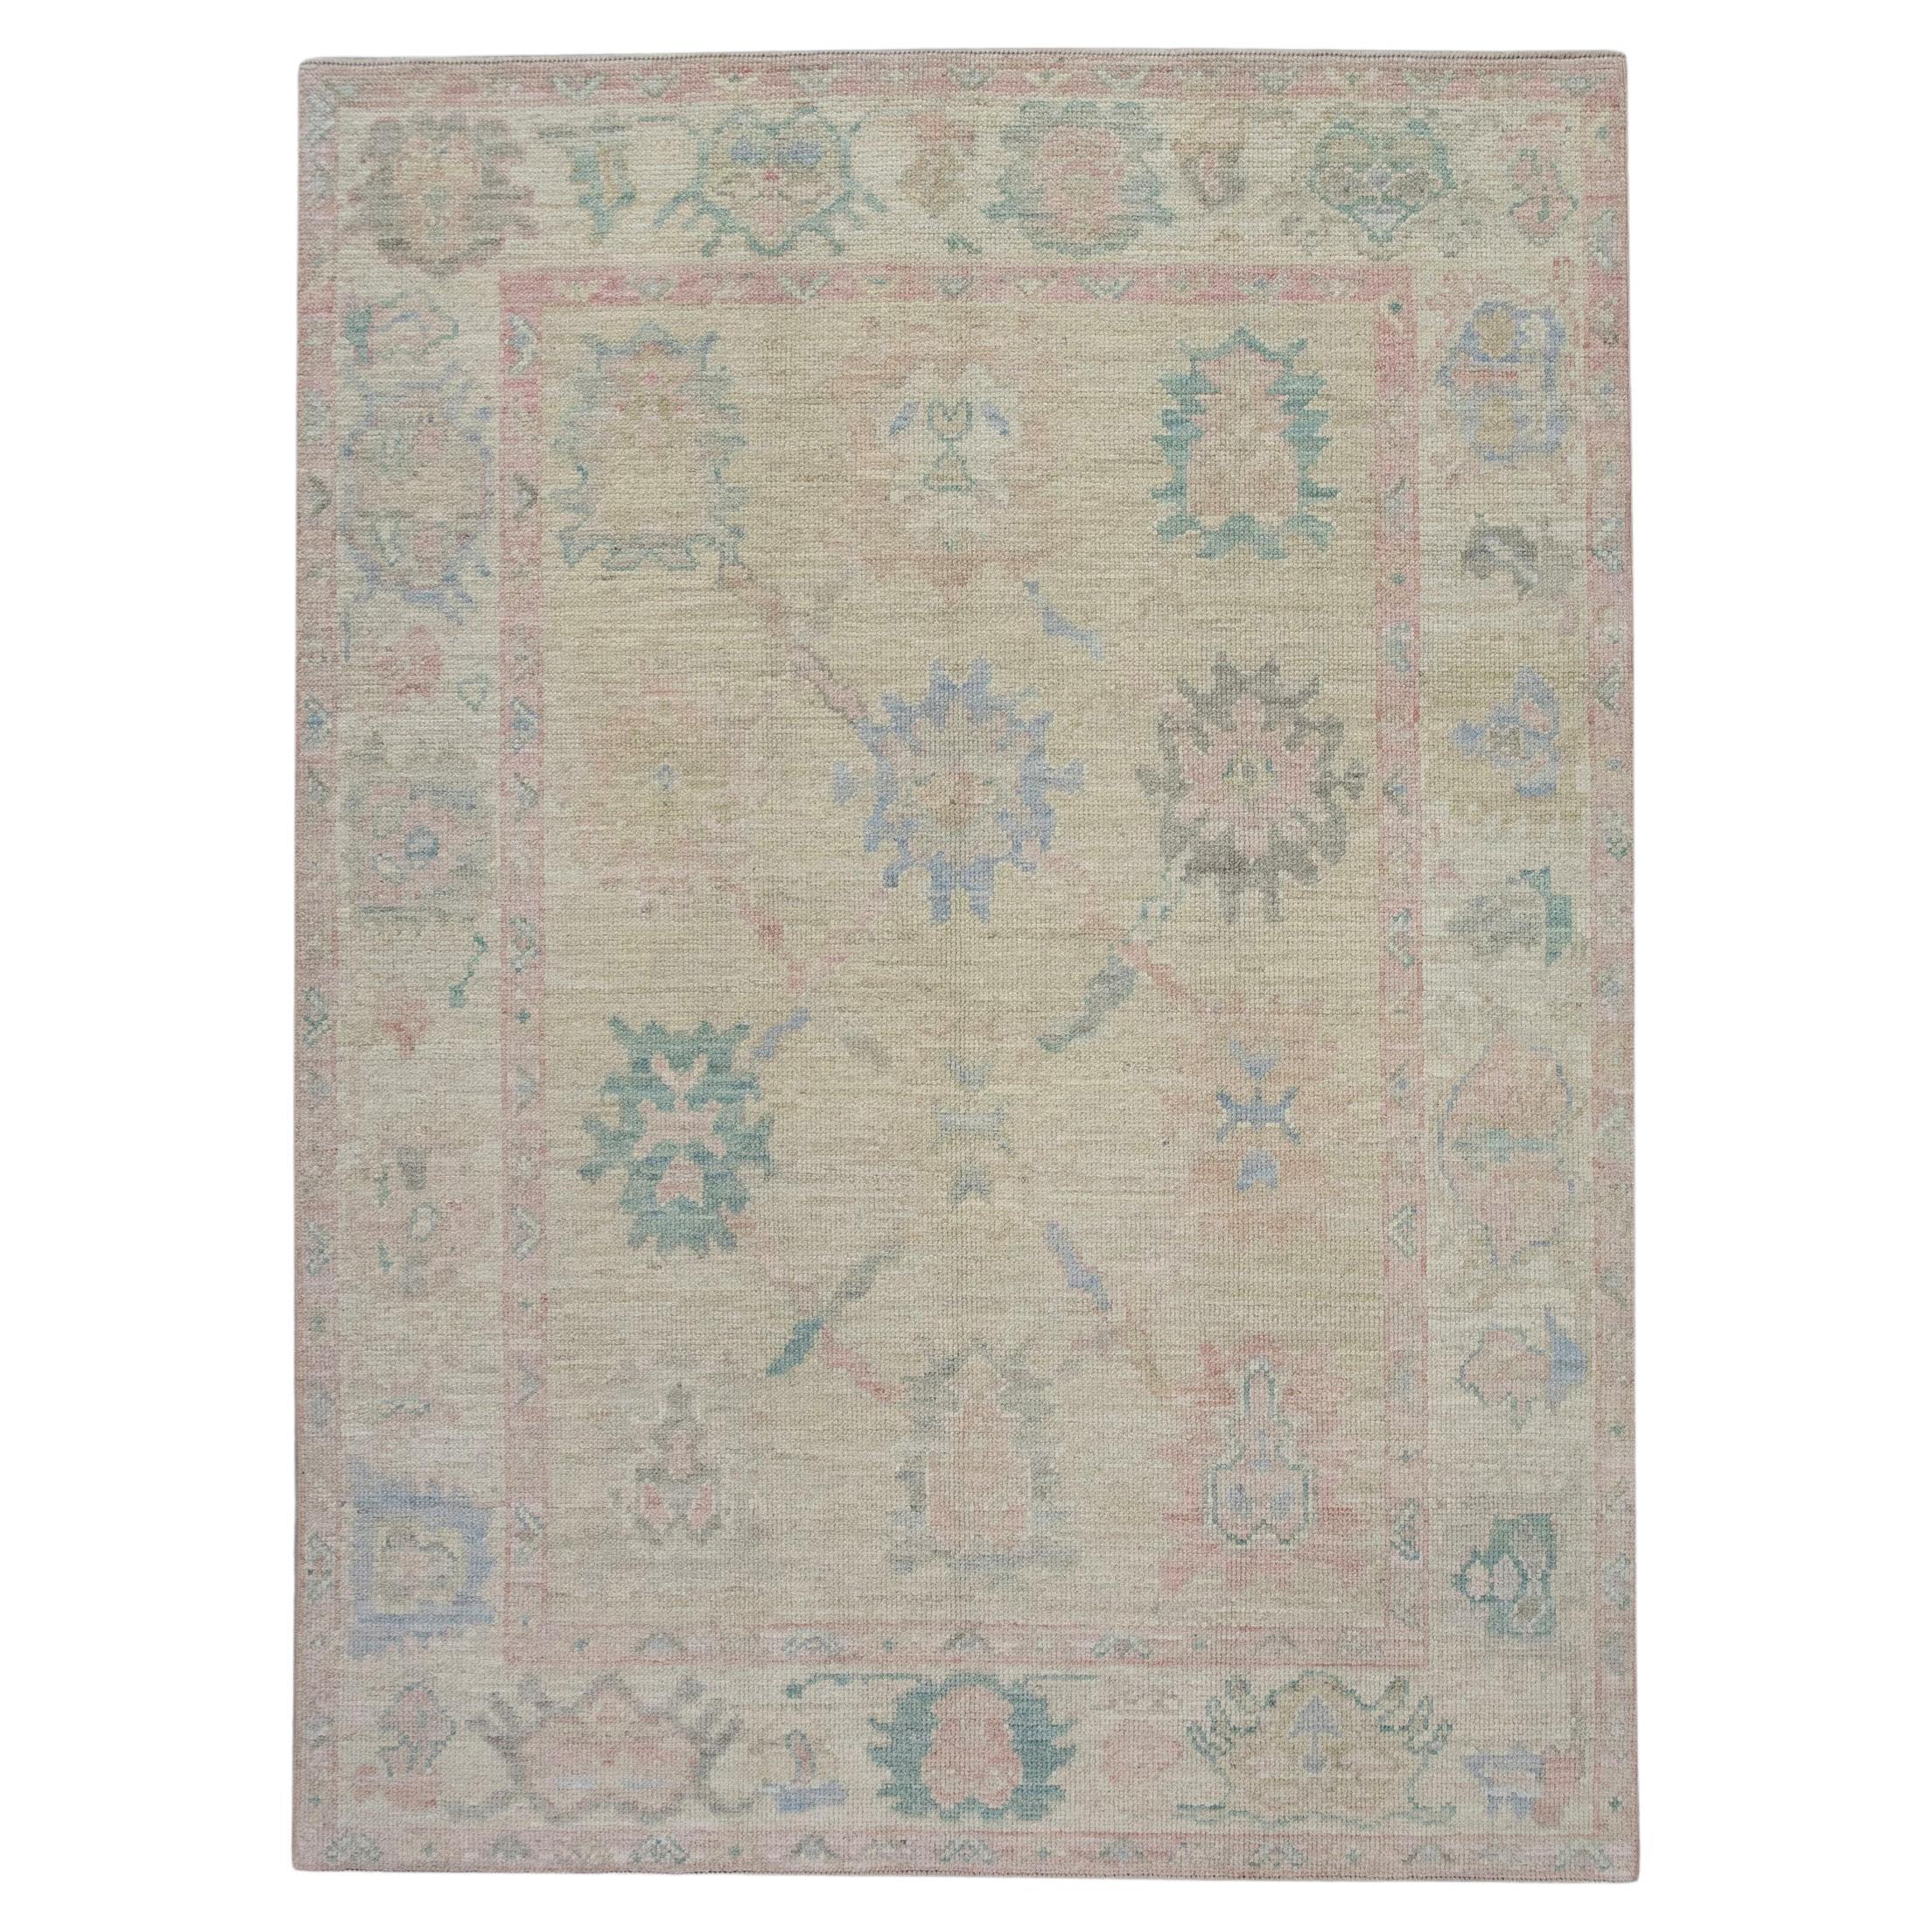 Multicolor Floral Handwoven Wool Turkish Oushak Rug 5' x 6'9" For Sale